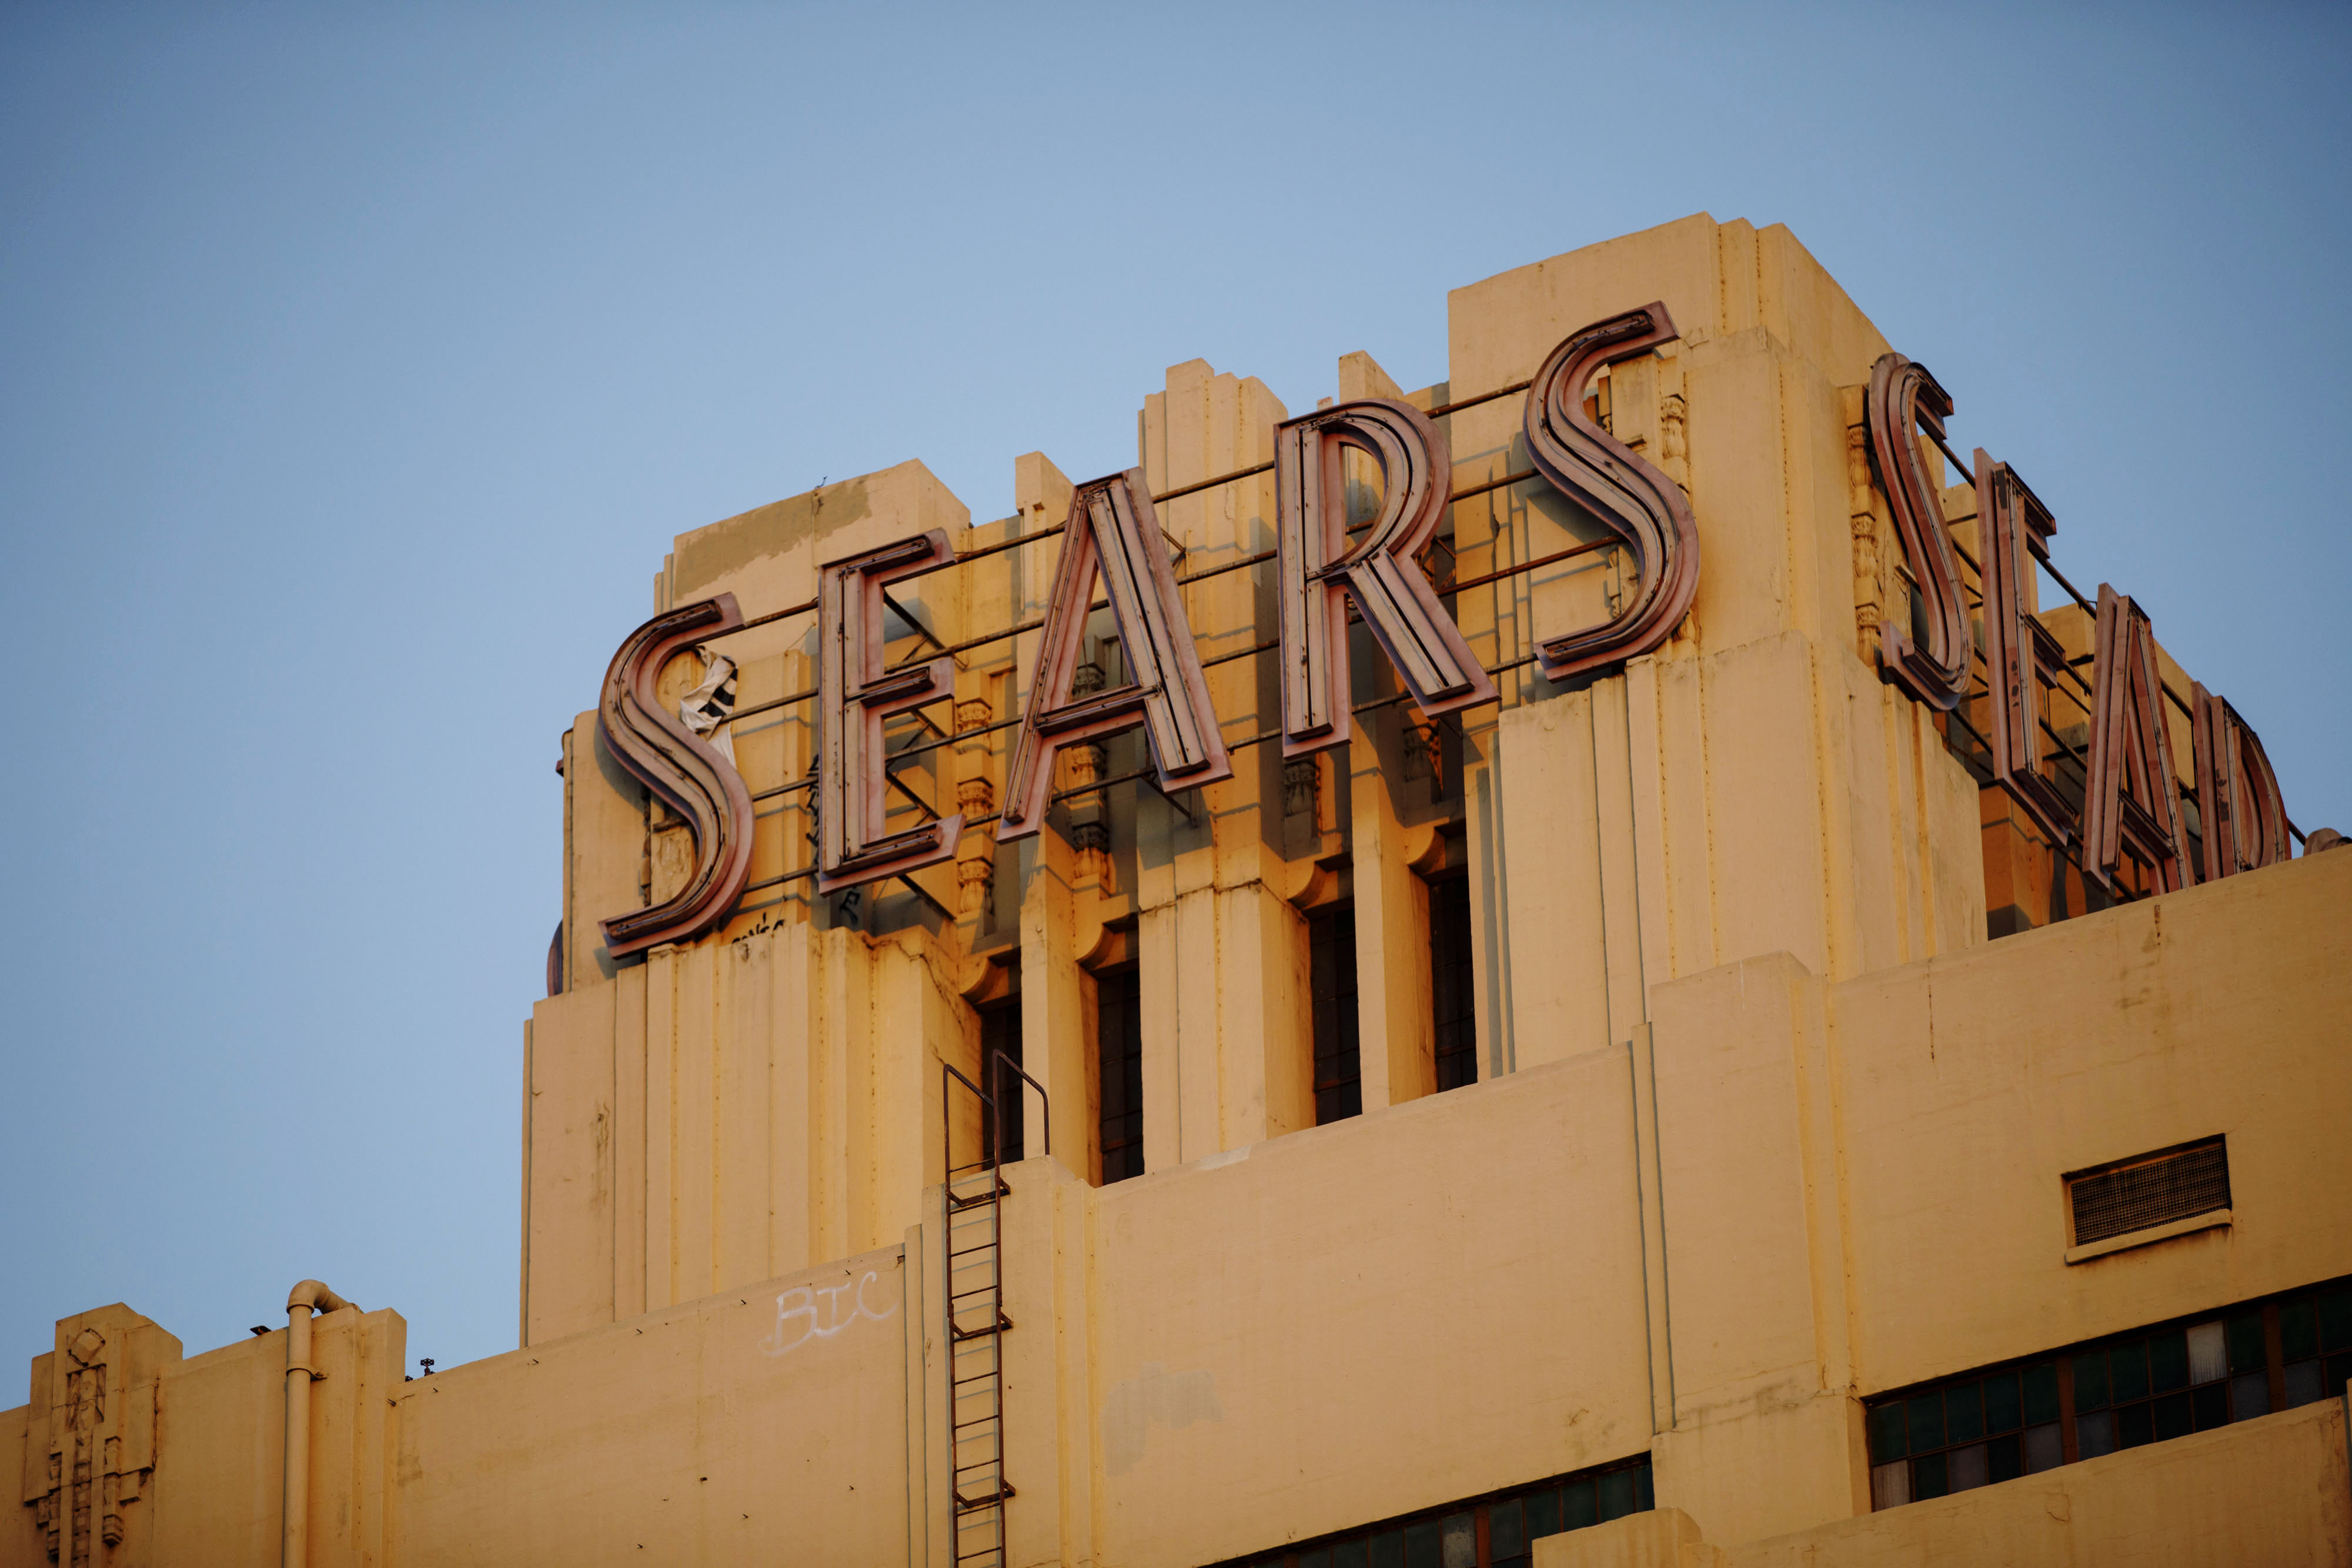 A New Test for Sears CEO Eddie Lampert - TheStreet